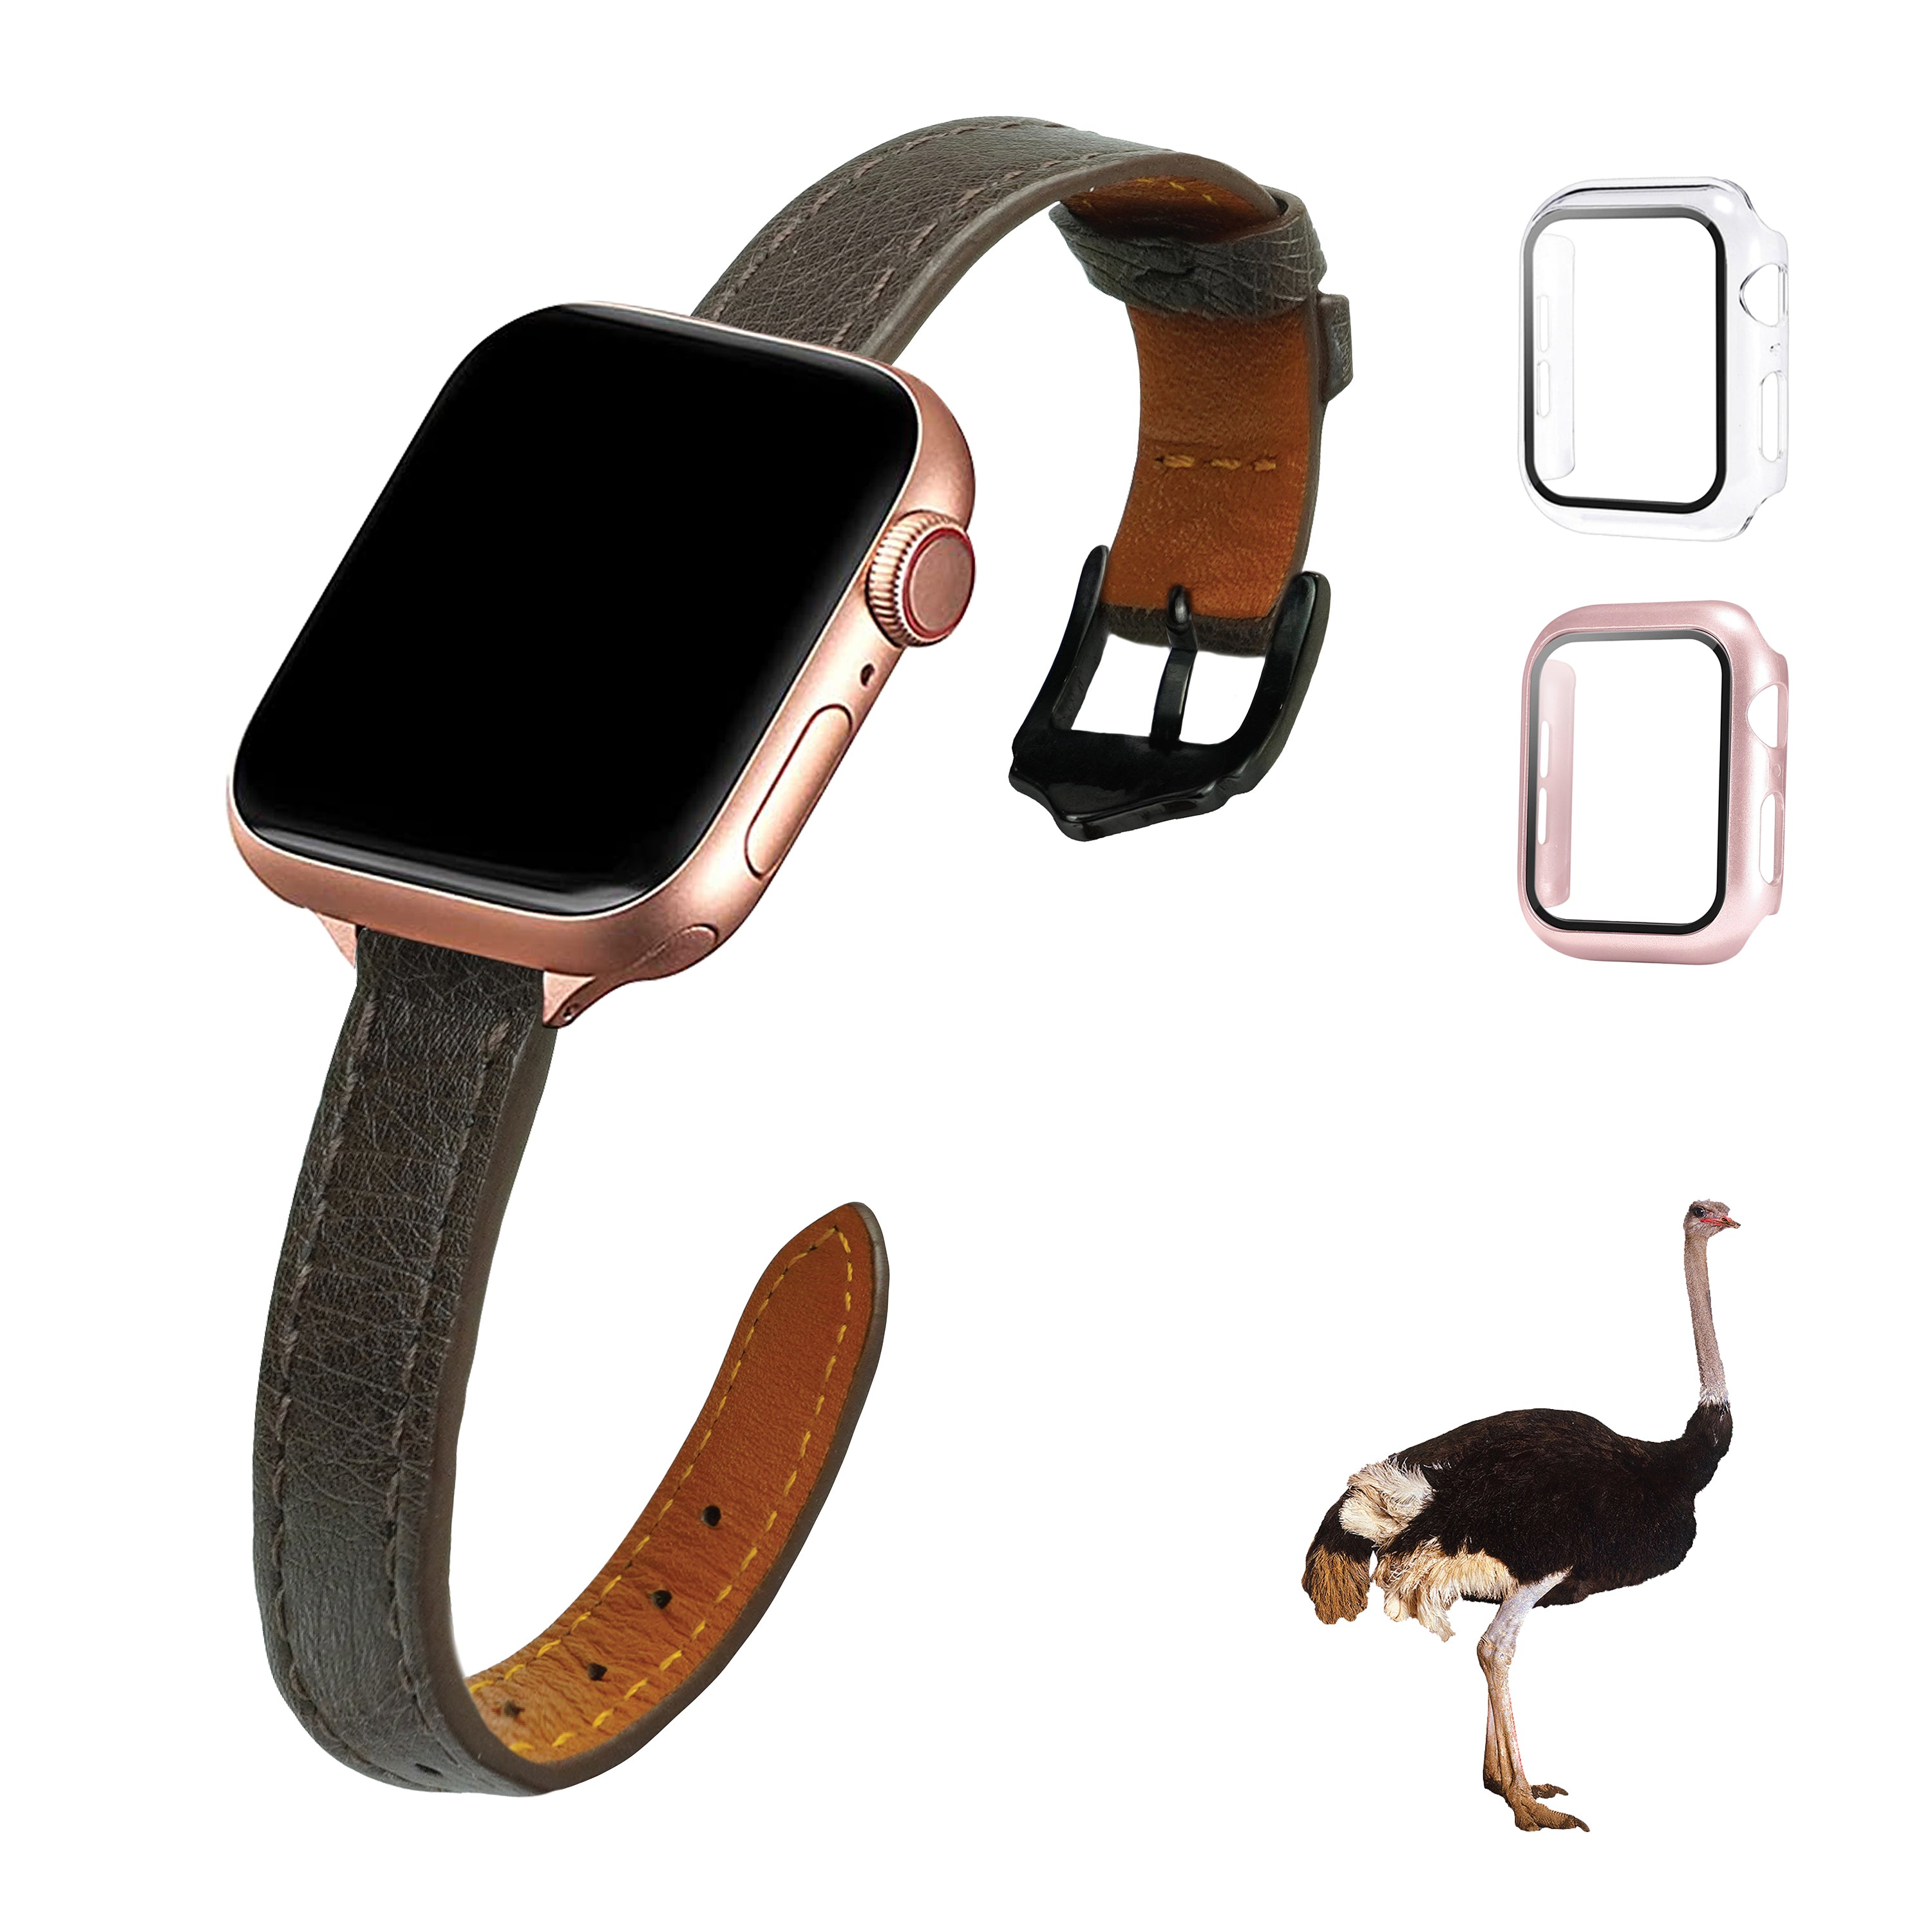 Dark Brown Flat Ostrich Leather Band Compatible Apple Watch Iwatch 44mm Screen Protector Case Black Adapter Replacement Strap For Smartwatch Series 4 5 6 SE Leather Handmade AW-183B-W-44MM